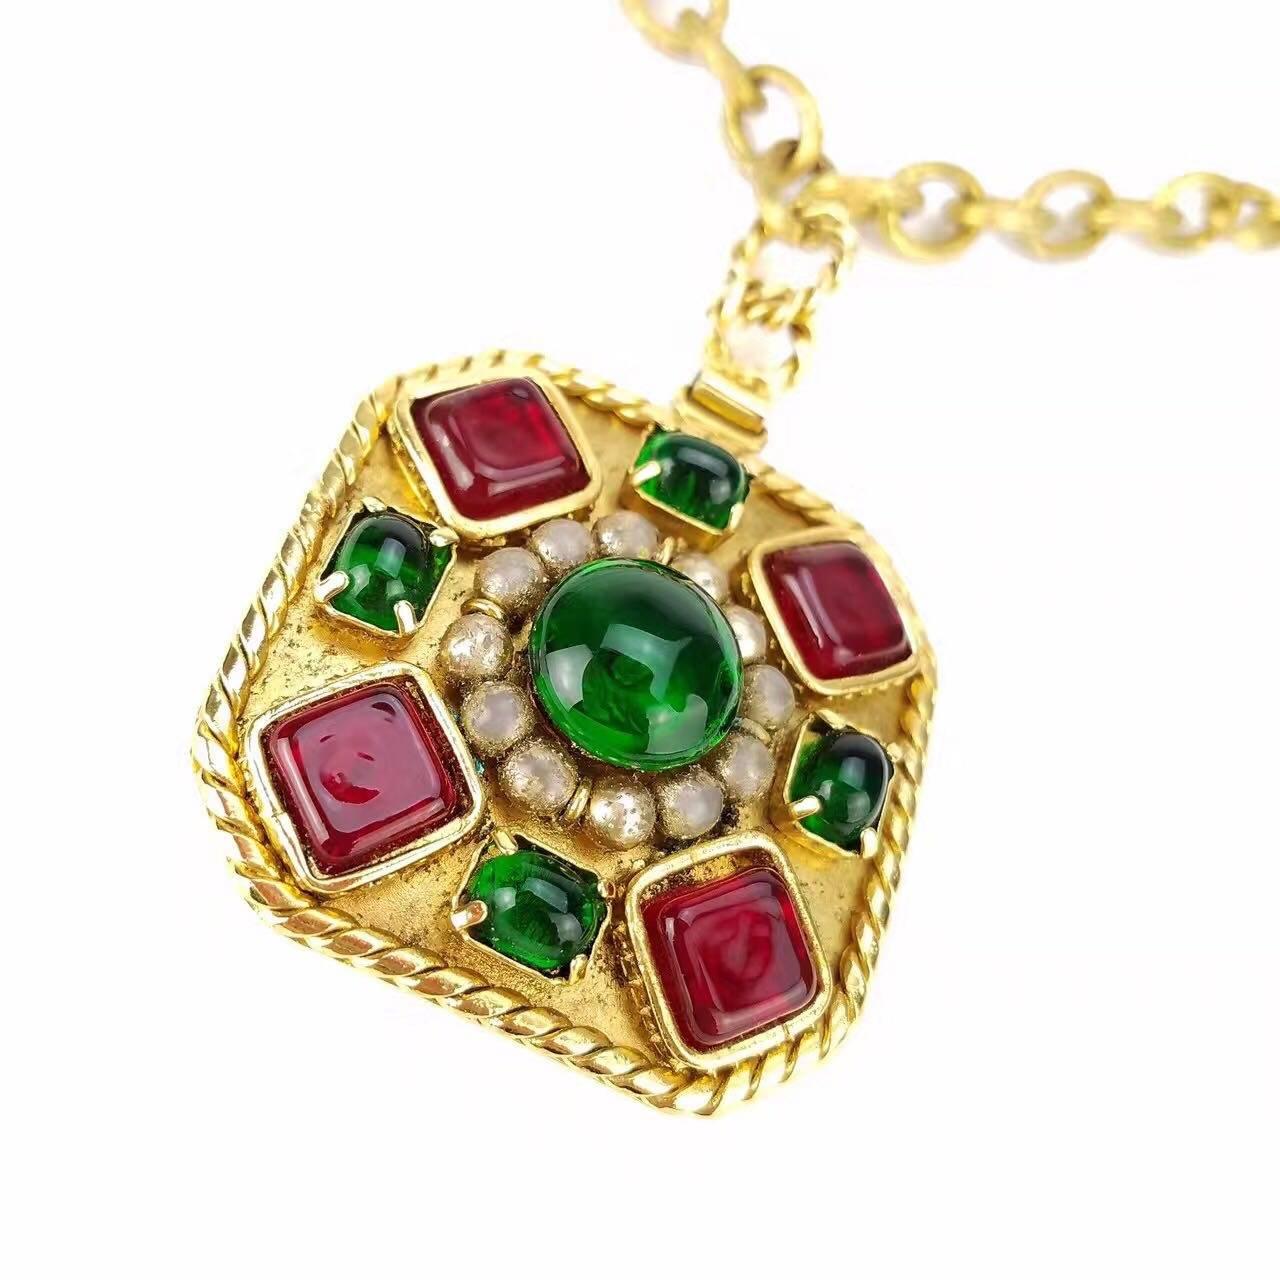 - Vintage 90s Chanel red and green gripoix glass with faux pearl square pendant gold chain necklace.

- Made in France. 

- Measurement: 5cm x 5cm pendant. Chain: 80cm. 

- It comes with an original box. 

- Please note this vintage item is not new,